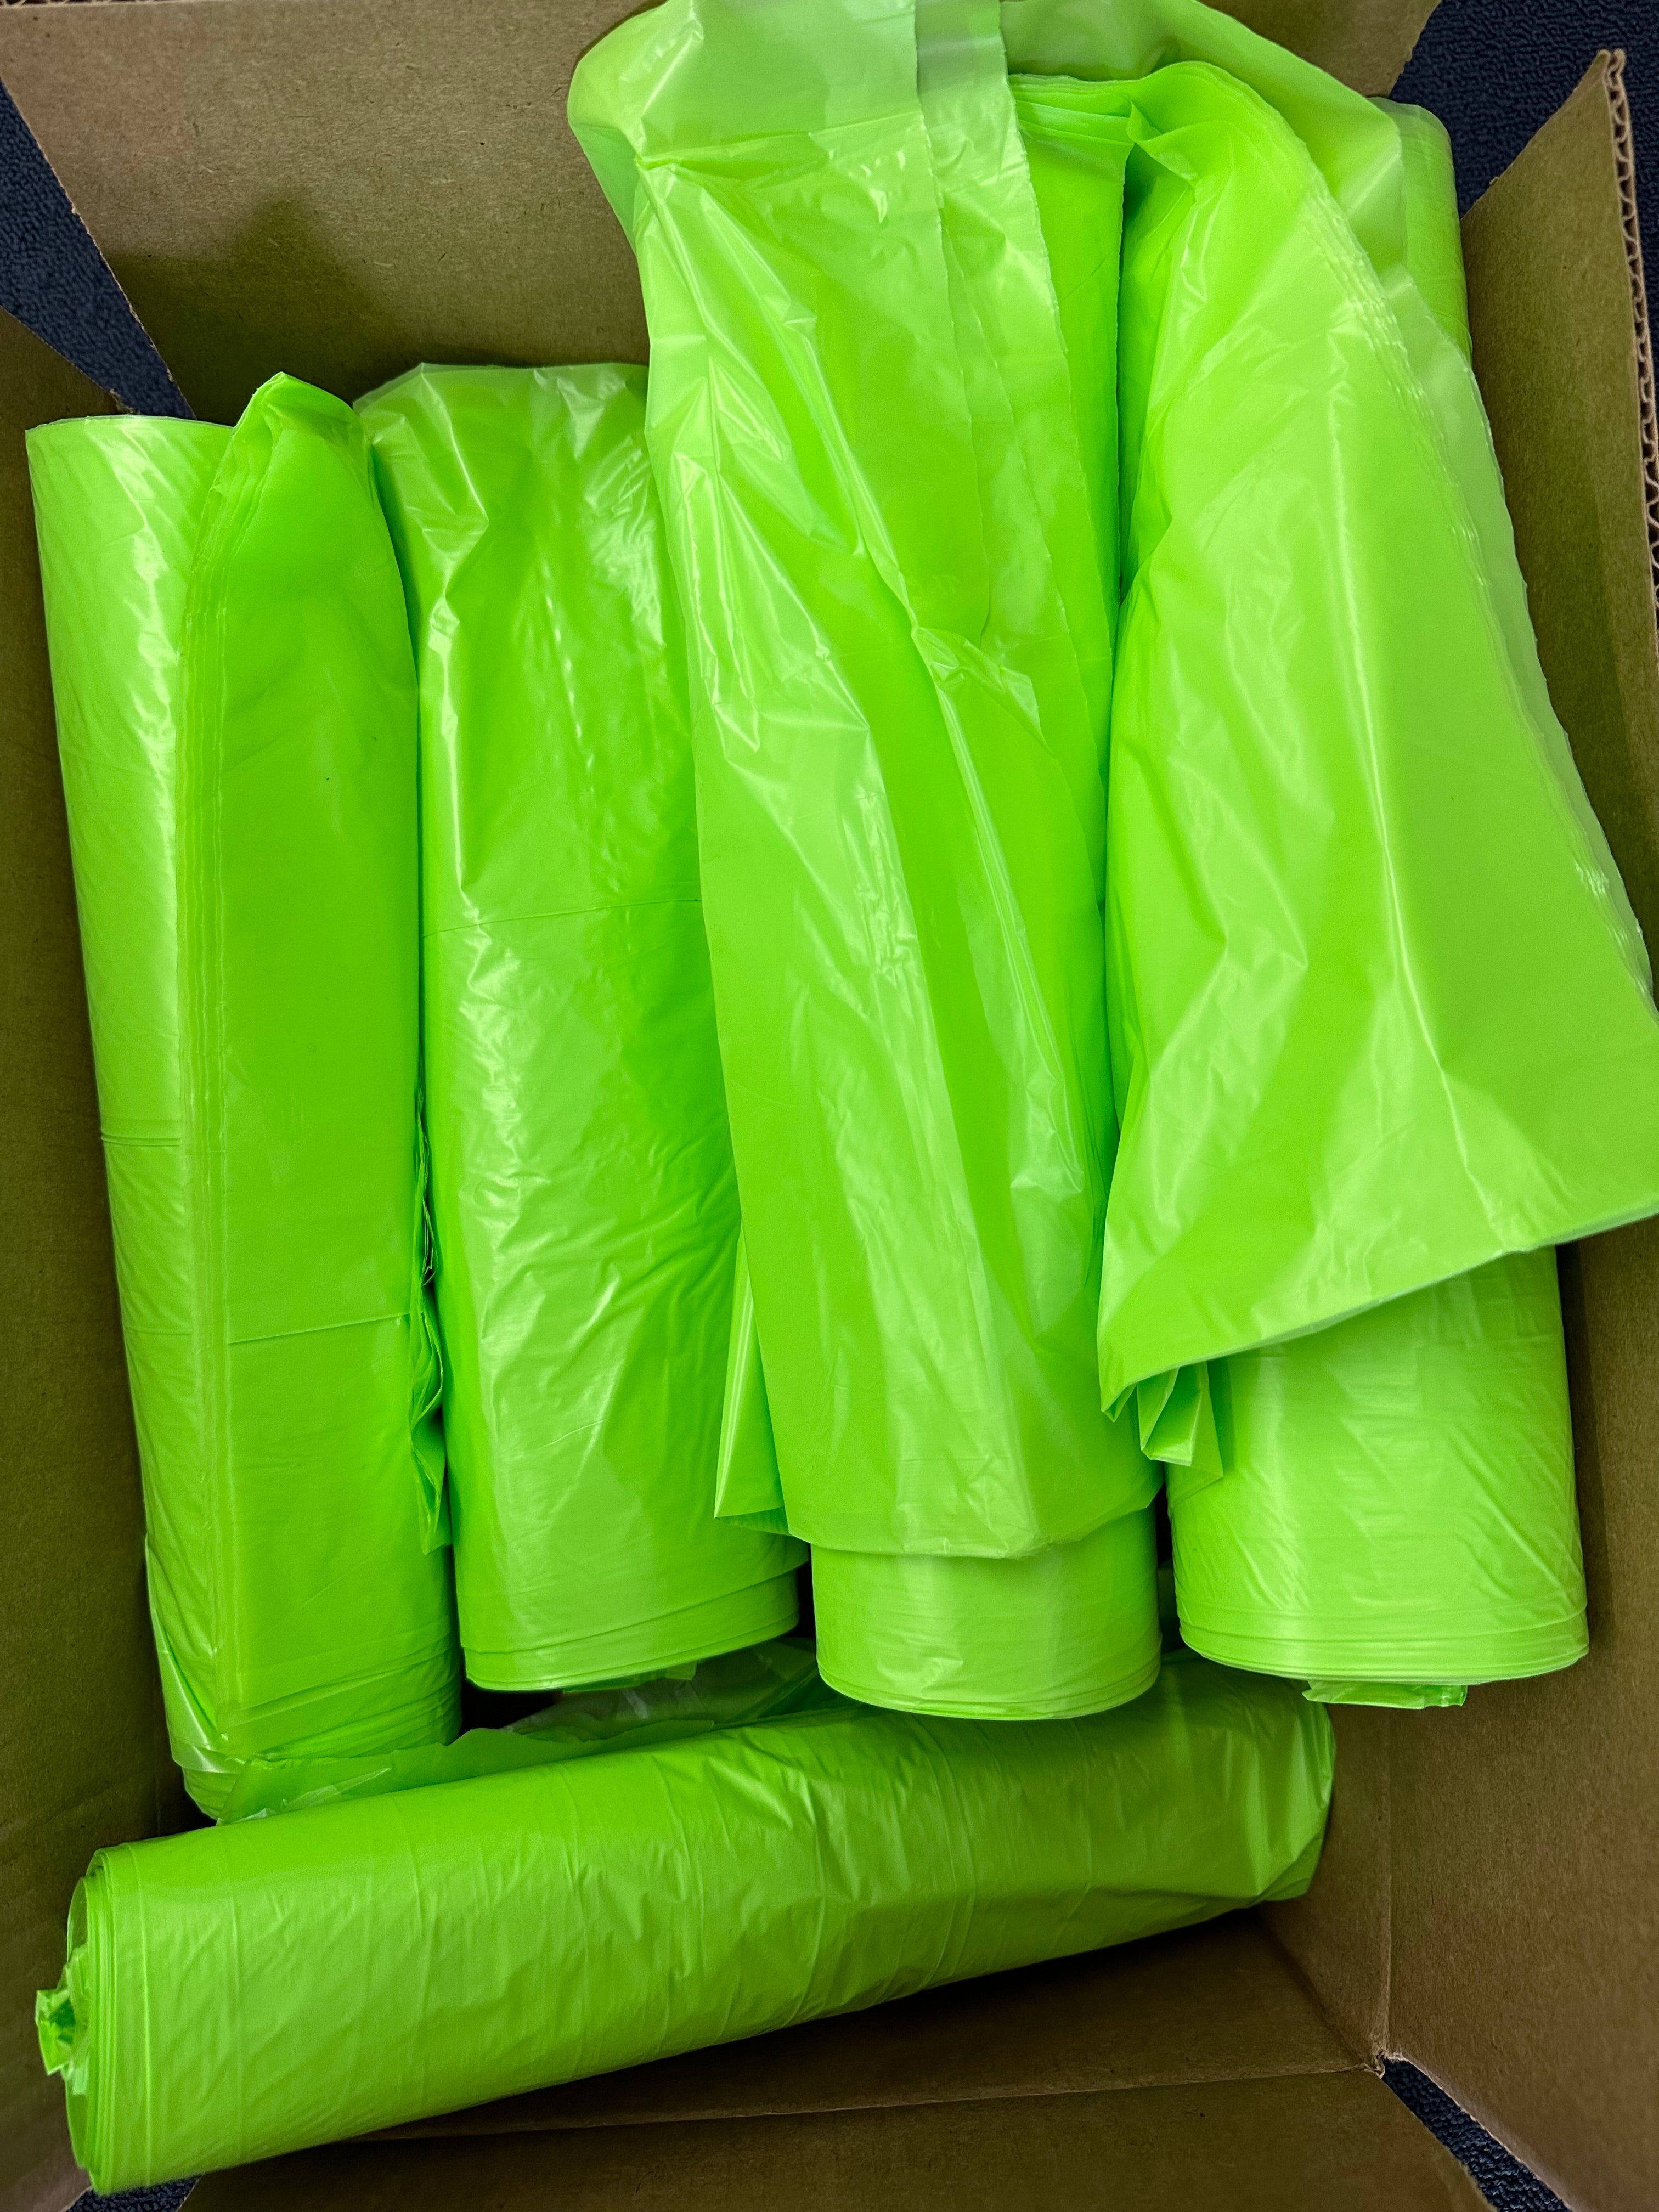 Extra Large Balloon Delivery Bags 48in x 96in